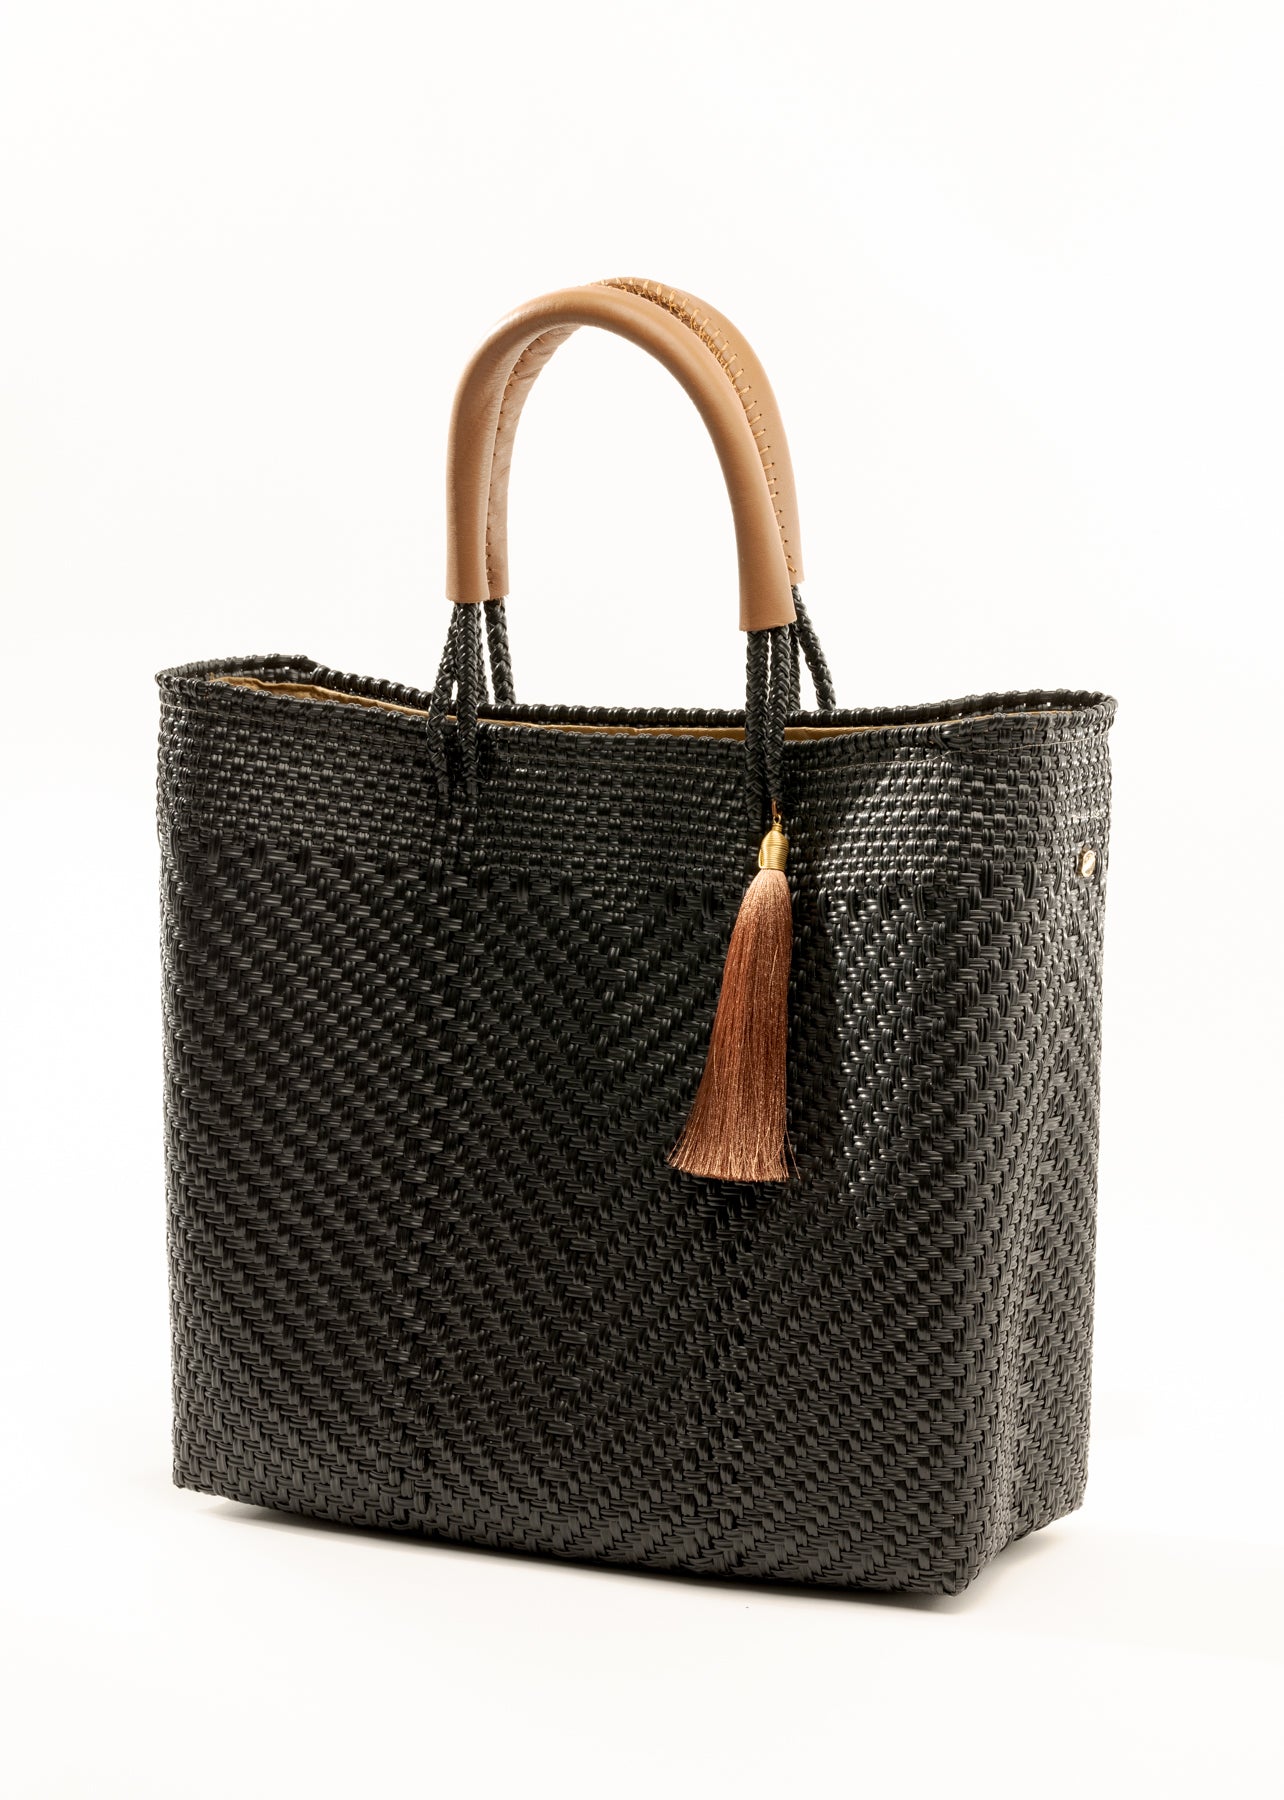 Side angle view of black and brown woven bucket bag made from recycled plastics featuring tan leather handles and tassel detail